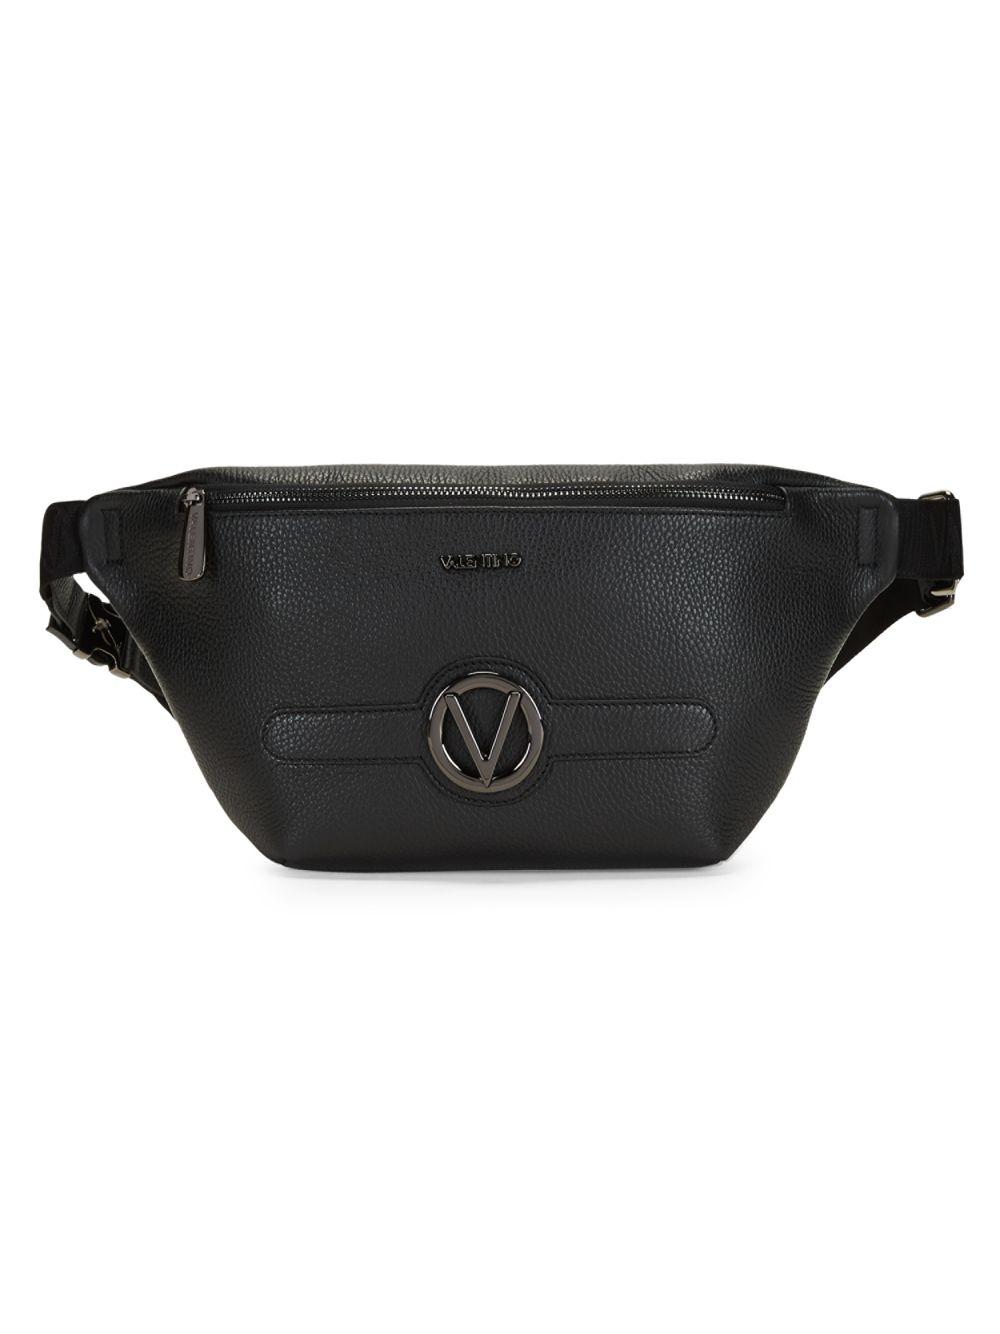 Lyst - Valentino By Mario Valentino Mickey Leather Belt Bag in Black